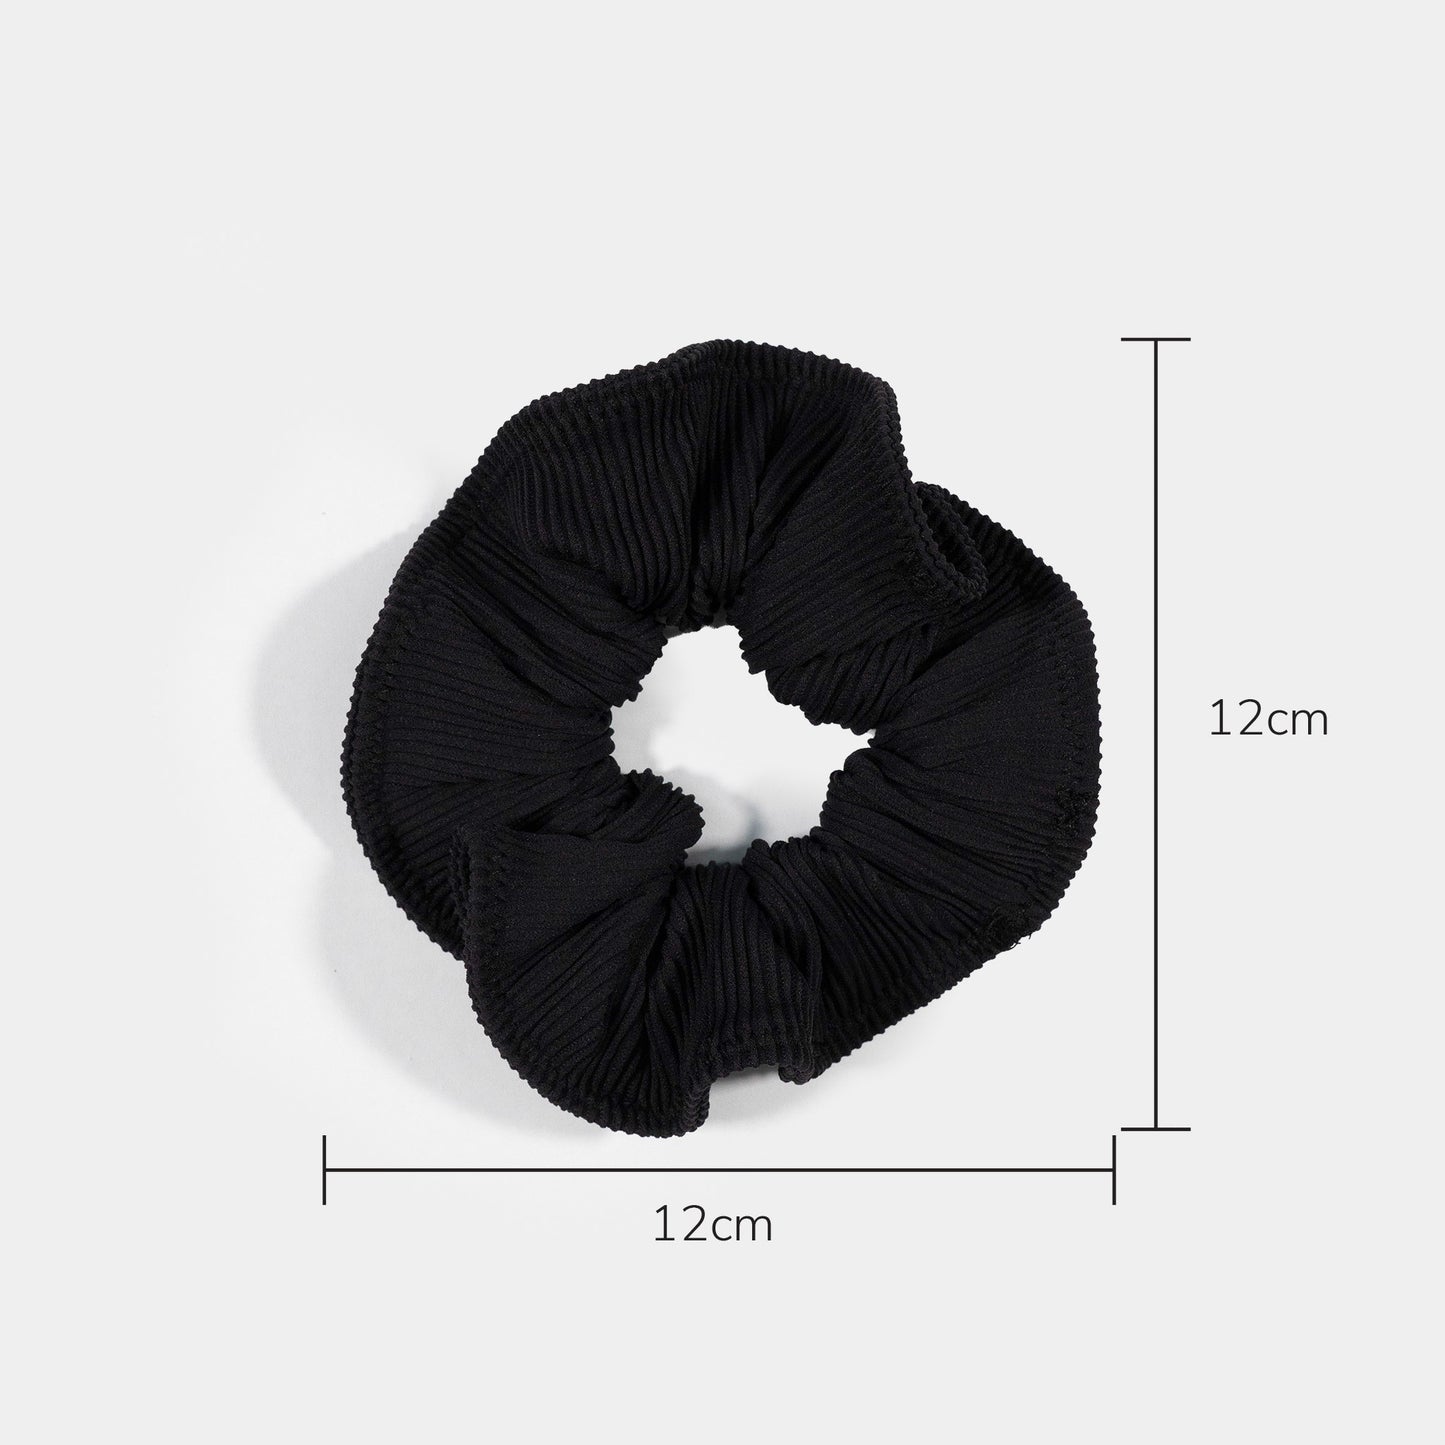 The Ribbed Scrunchie